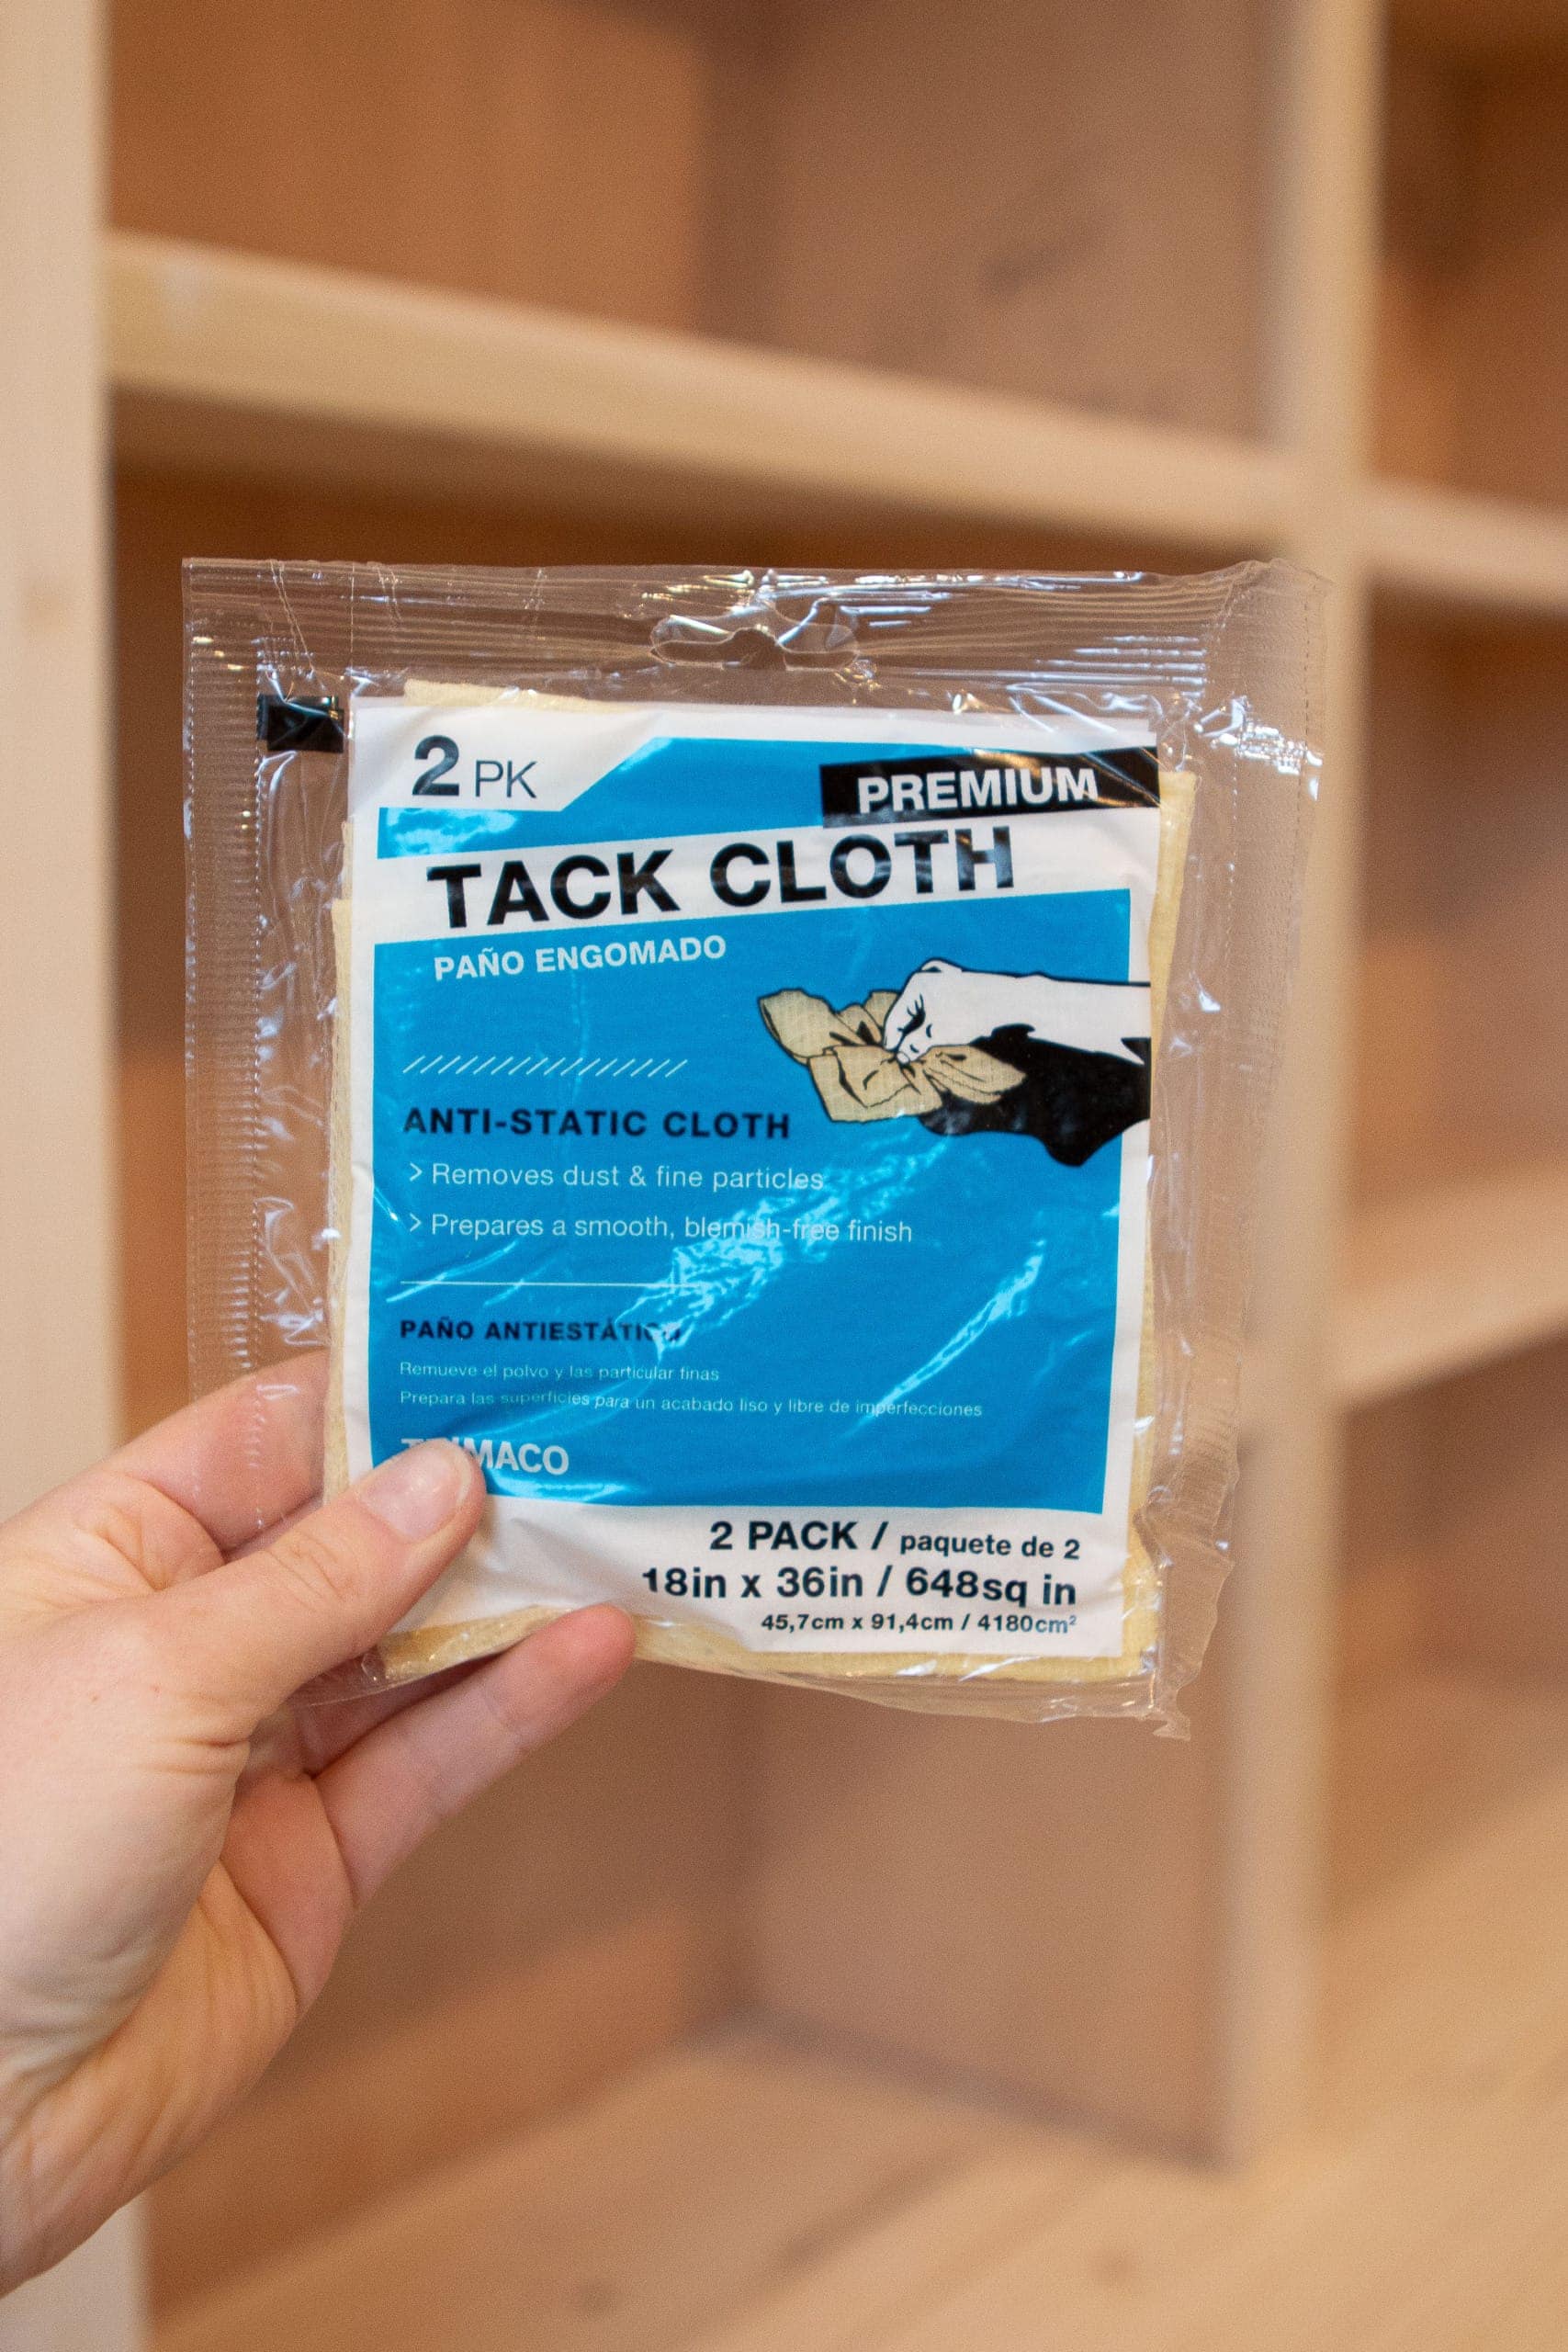 Tack cloth to get rid of dust. 